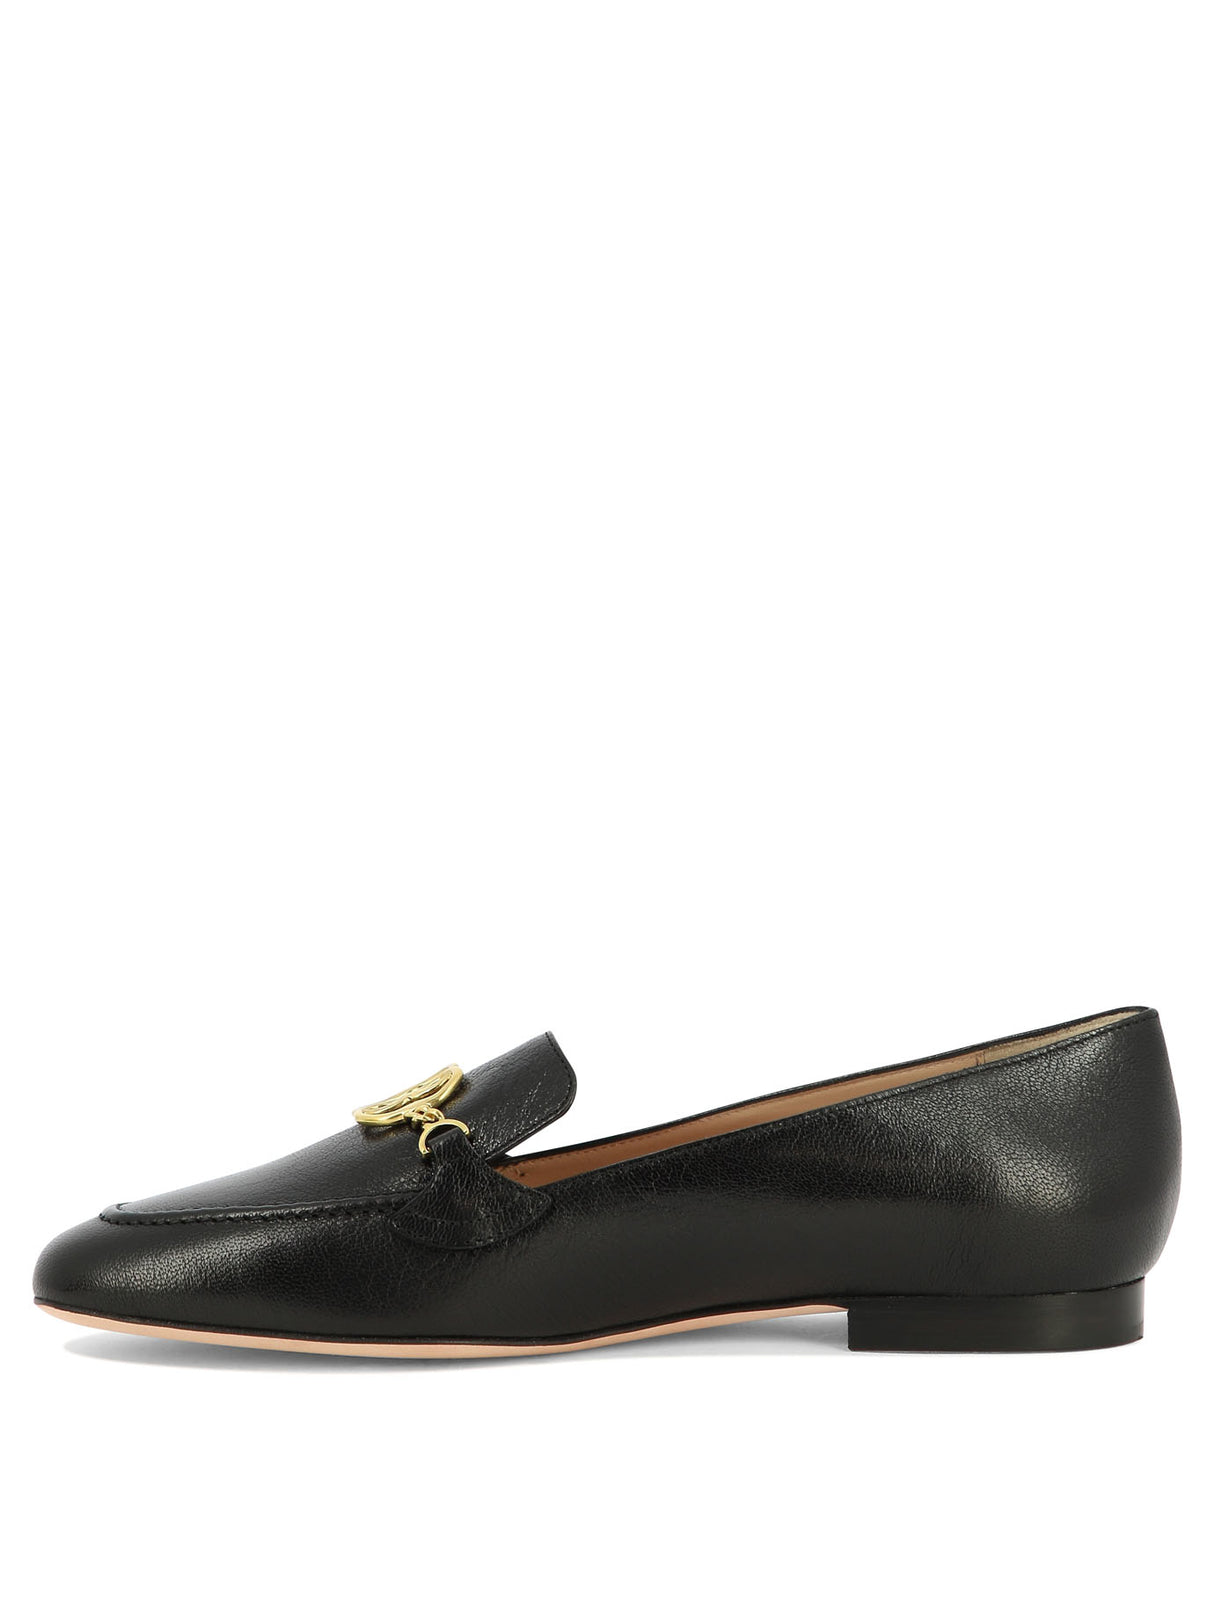 BALLY Men's Black Leather Loafers for FW23 Season